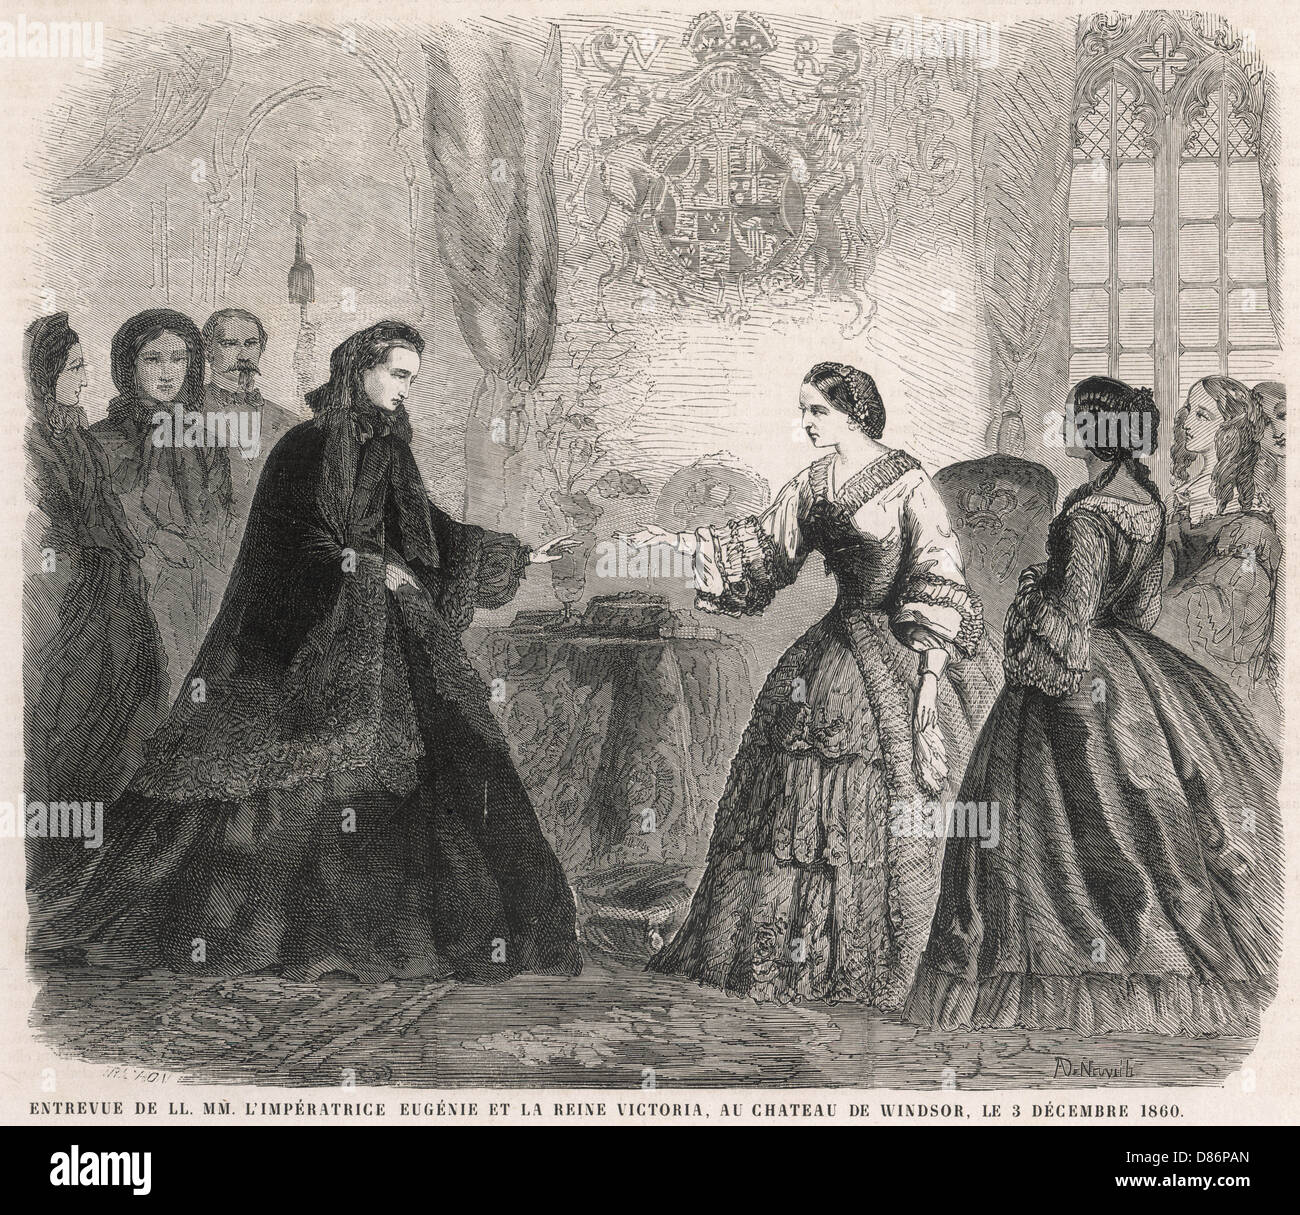 At the Paris opera , the Italian Theatre. Napoleon III with Empress Eugenie,  Victoria & Albert of England in loge / box - by Alophe 1855 Stock Photo -  Alamy